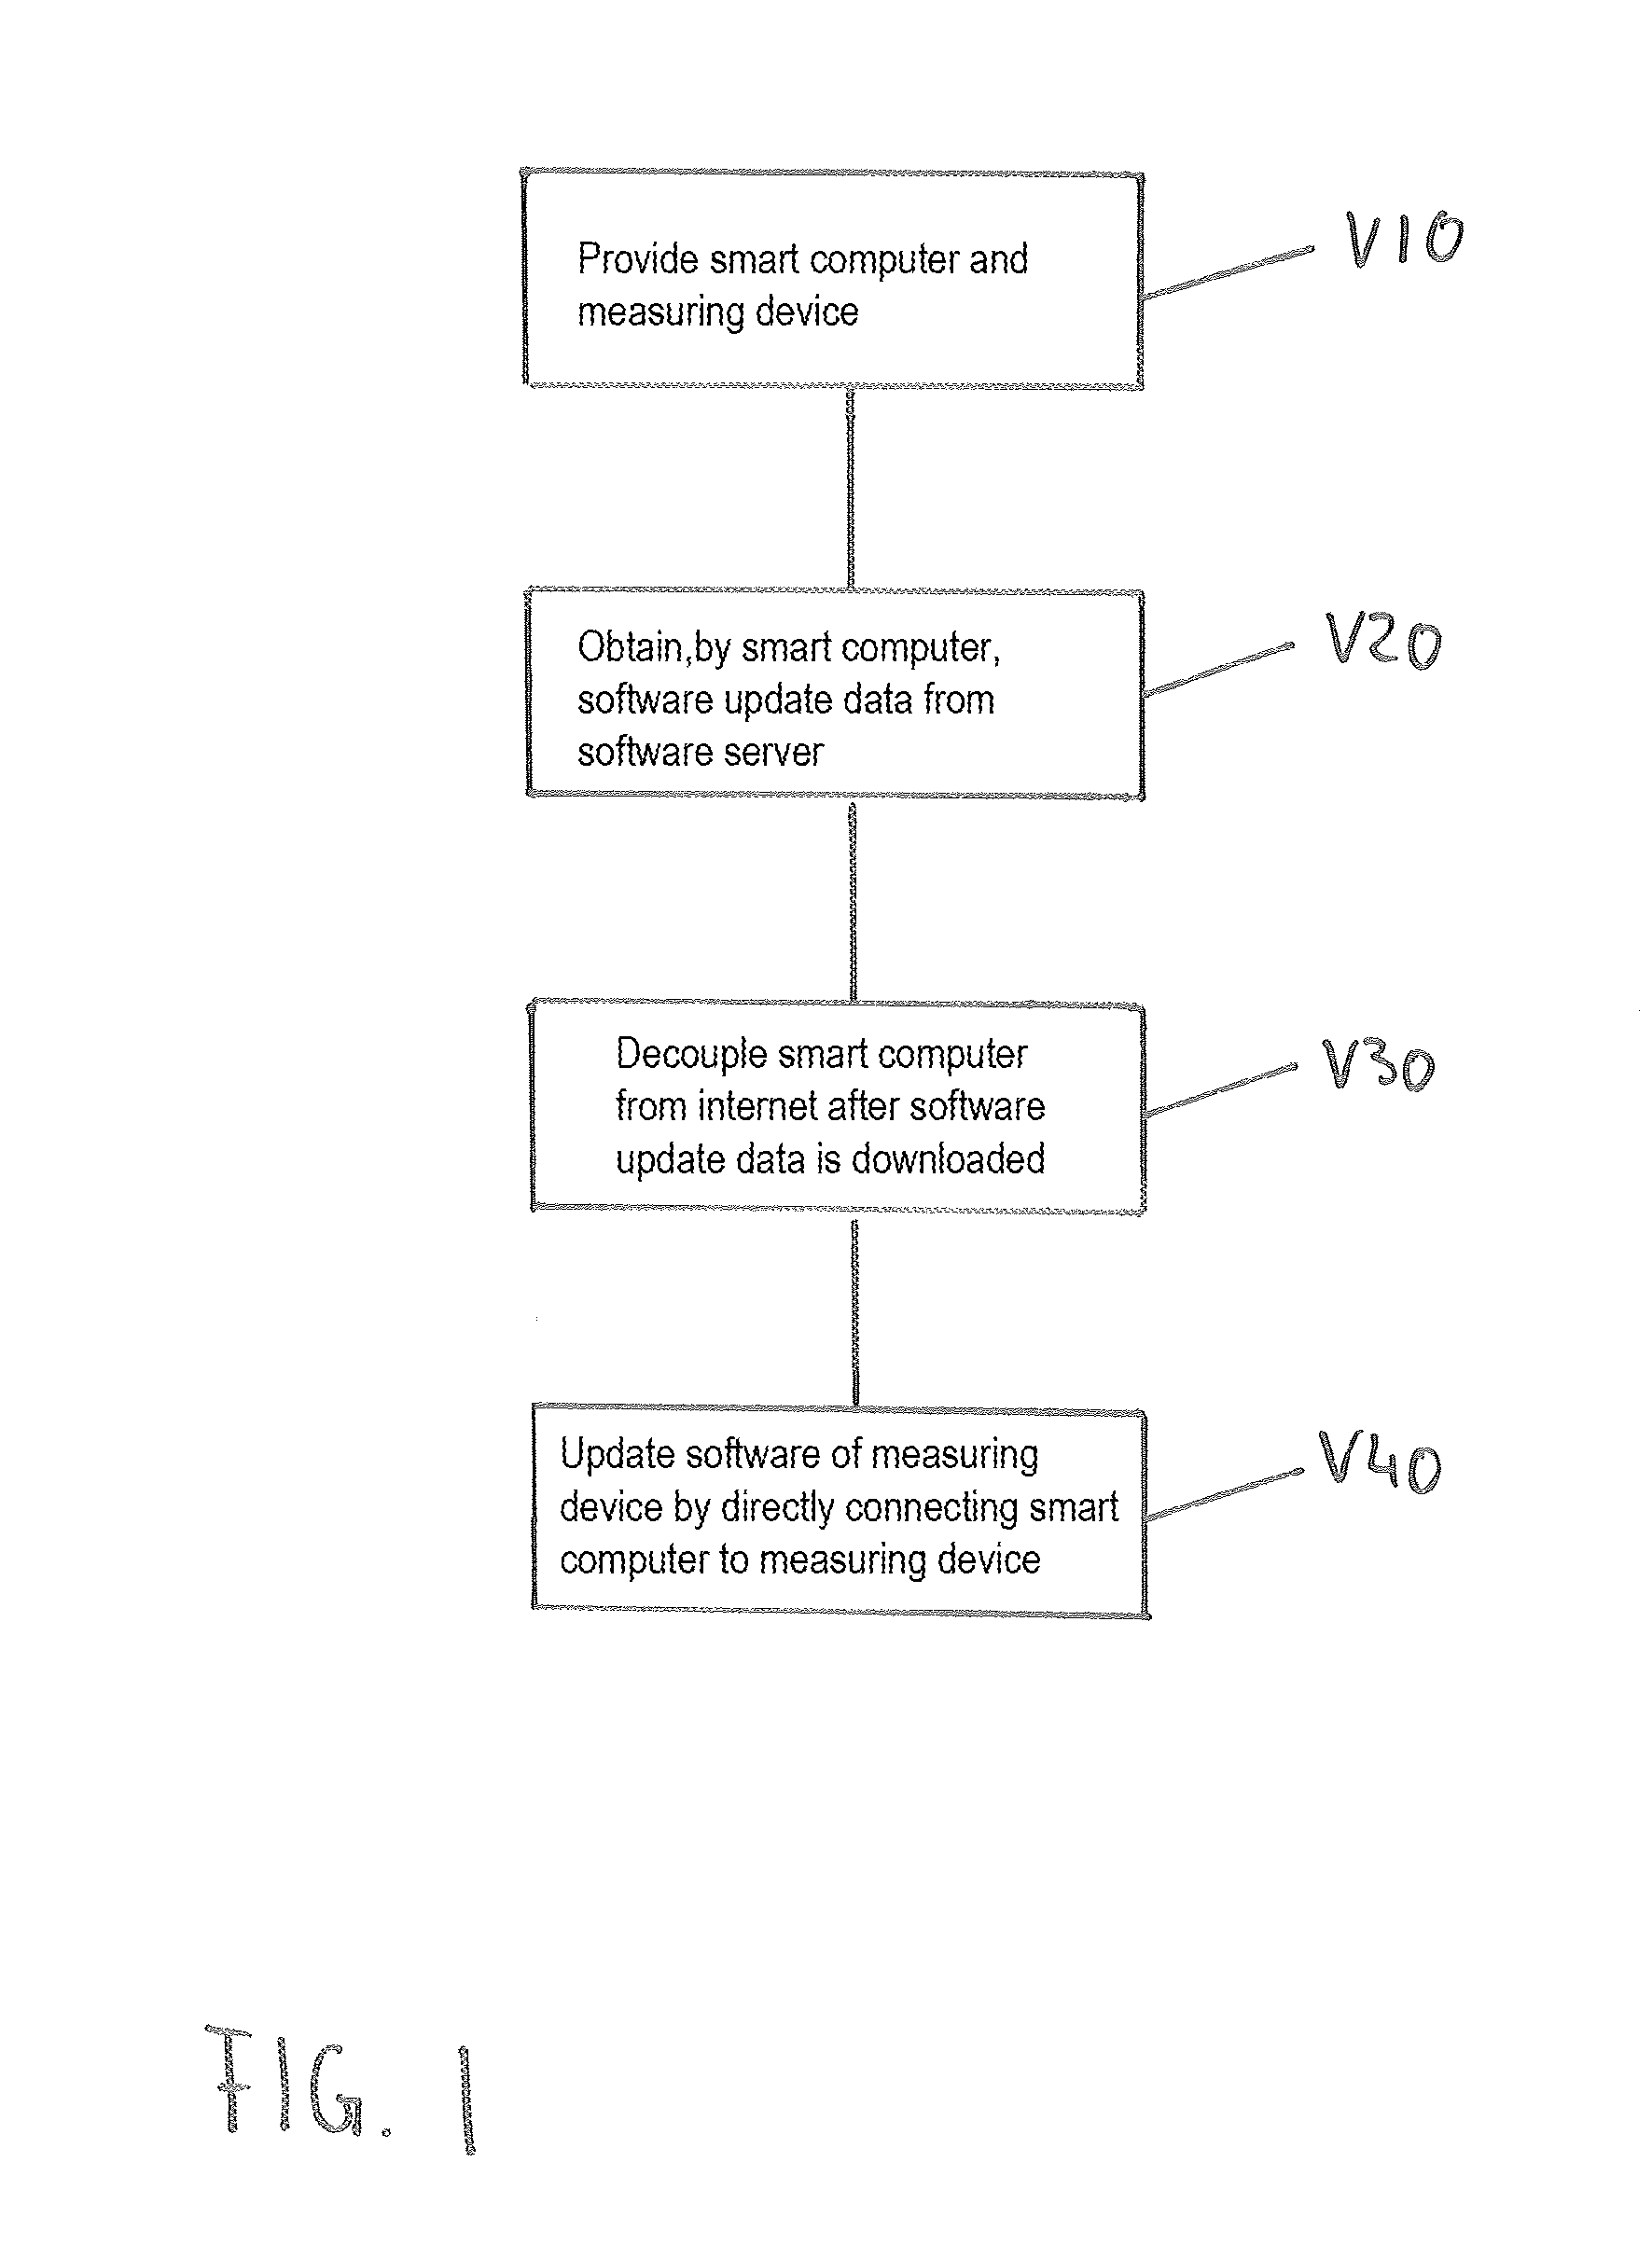 Method for updating software of a measuring device, smart computer and computer readable program product